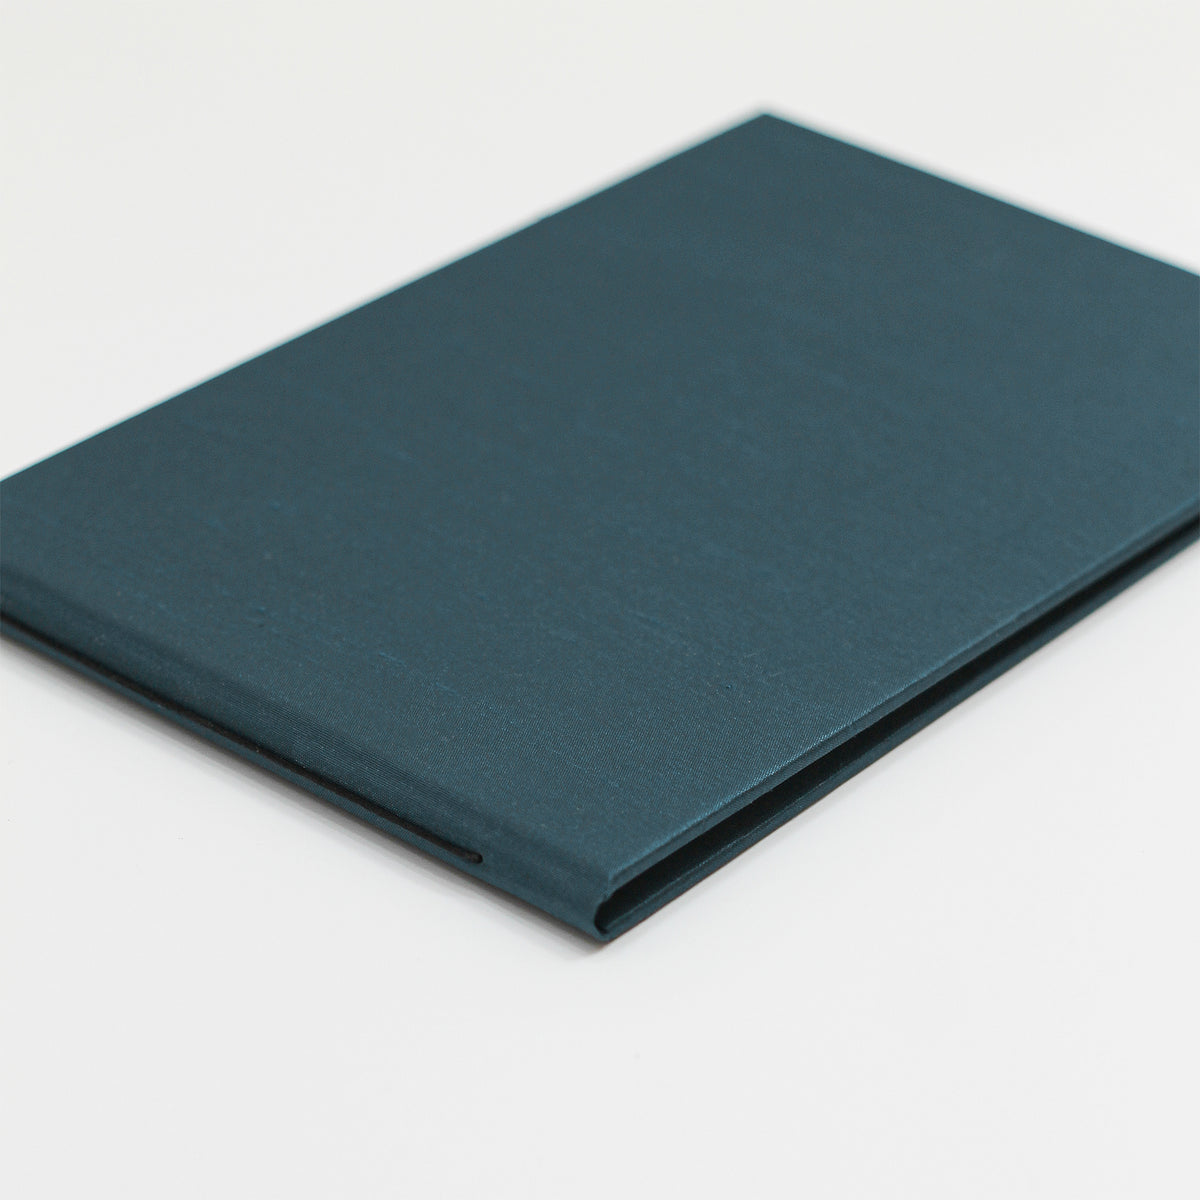 Guestbook | Cover: Teal Blue Silk | Available Personalized